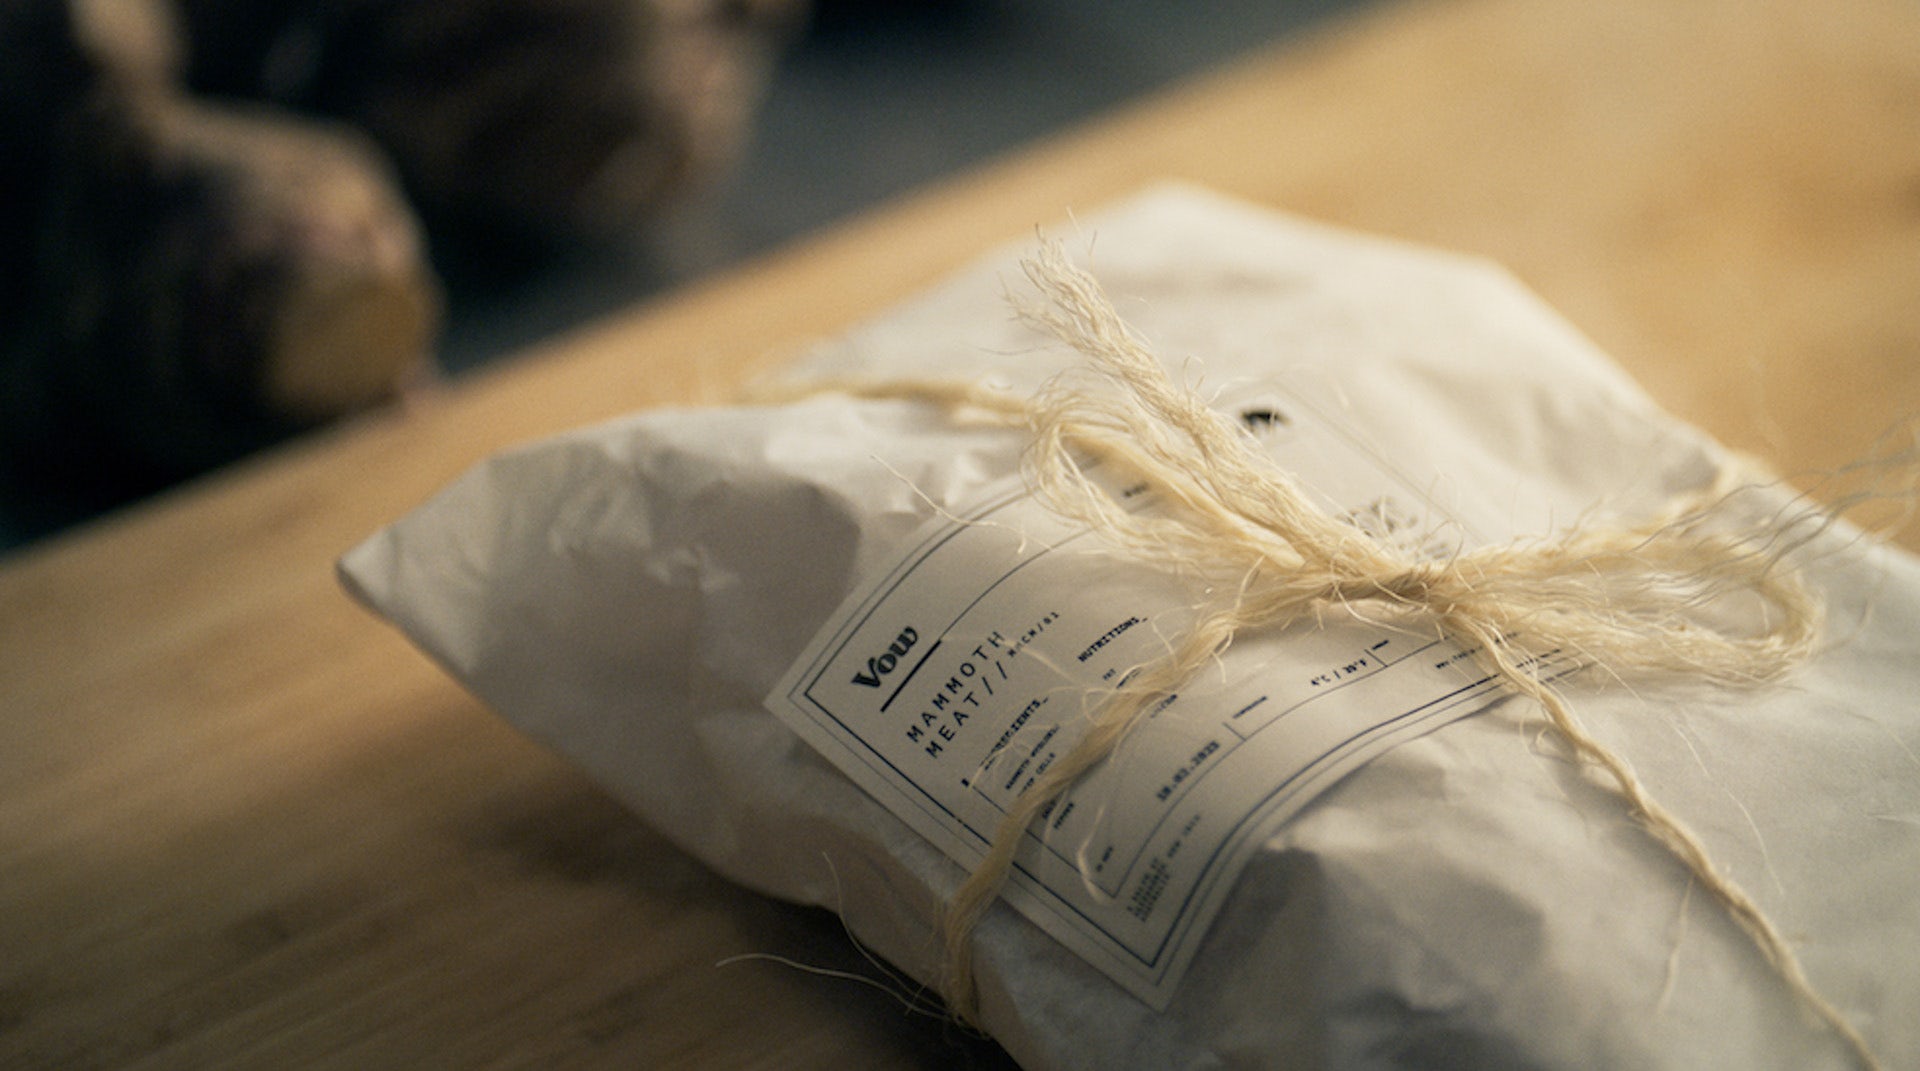 Image shows a white paper package tied with string containing Mammoth meat